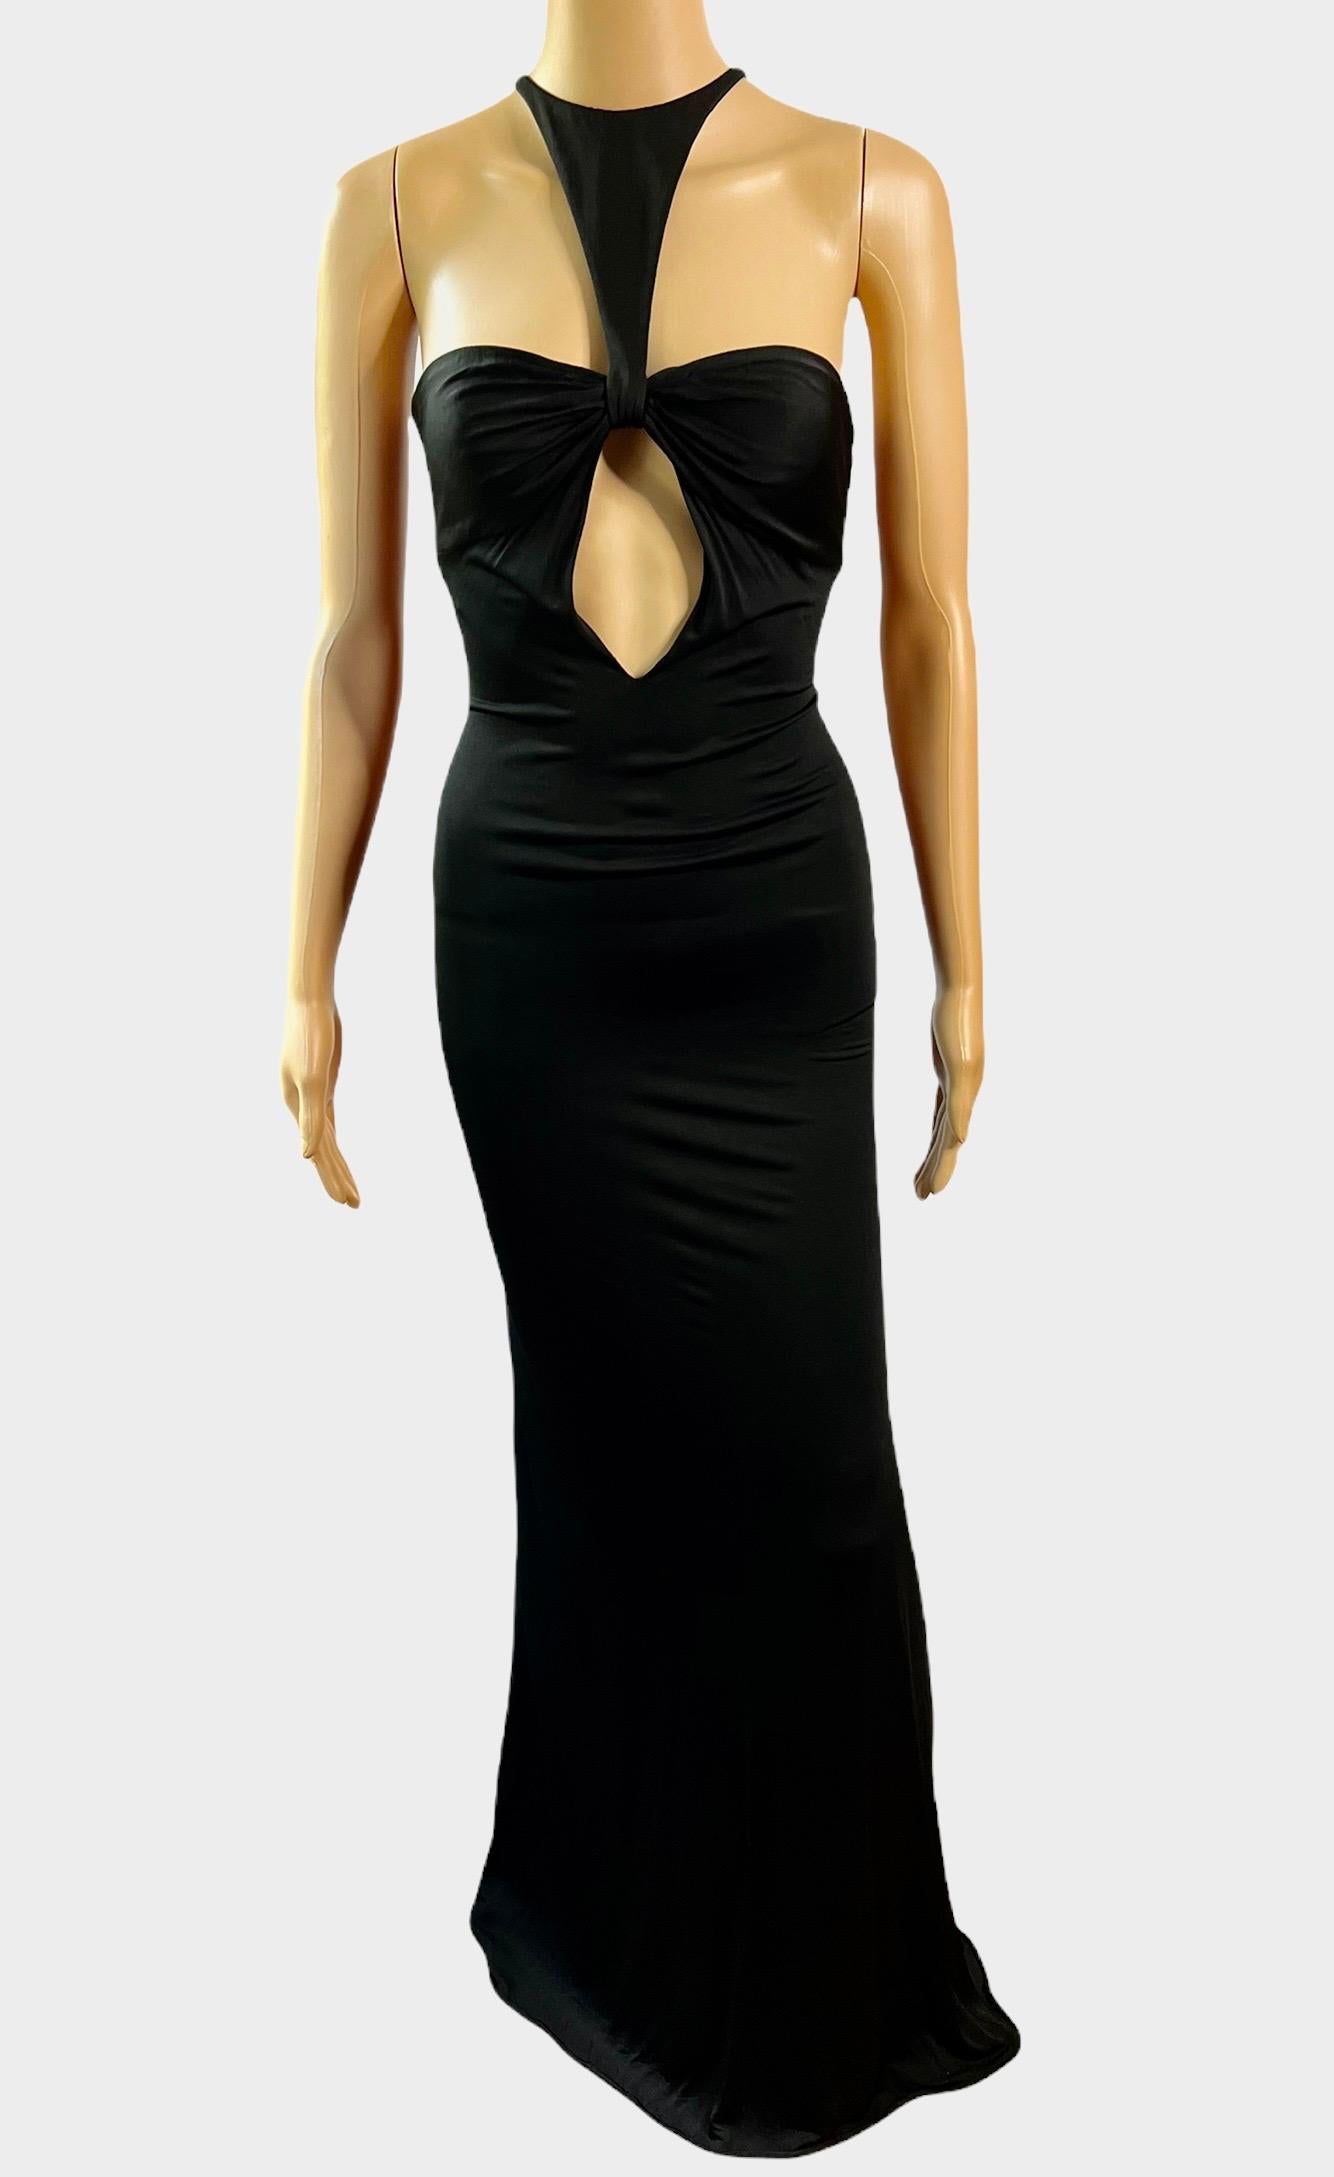 Women's Tom Ford for Gucci F/W 2004 Plunging Cutout Black Evening Dress Gown For Sale